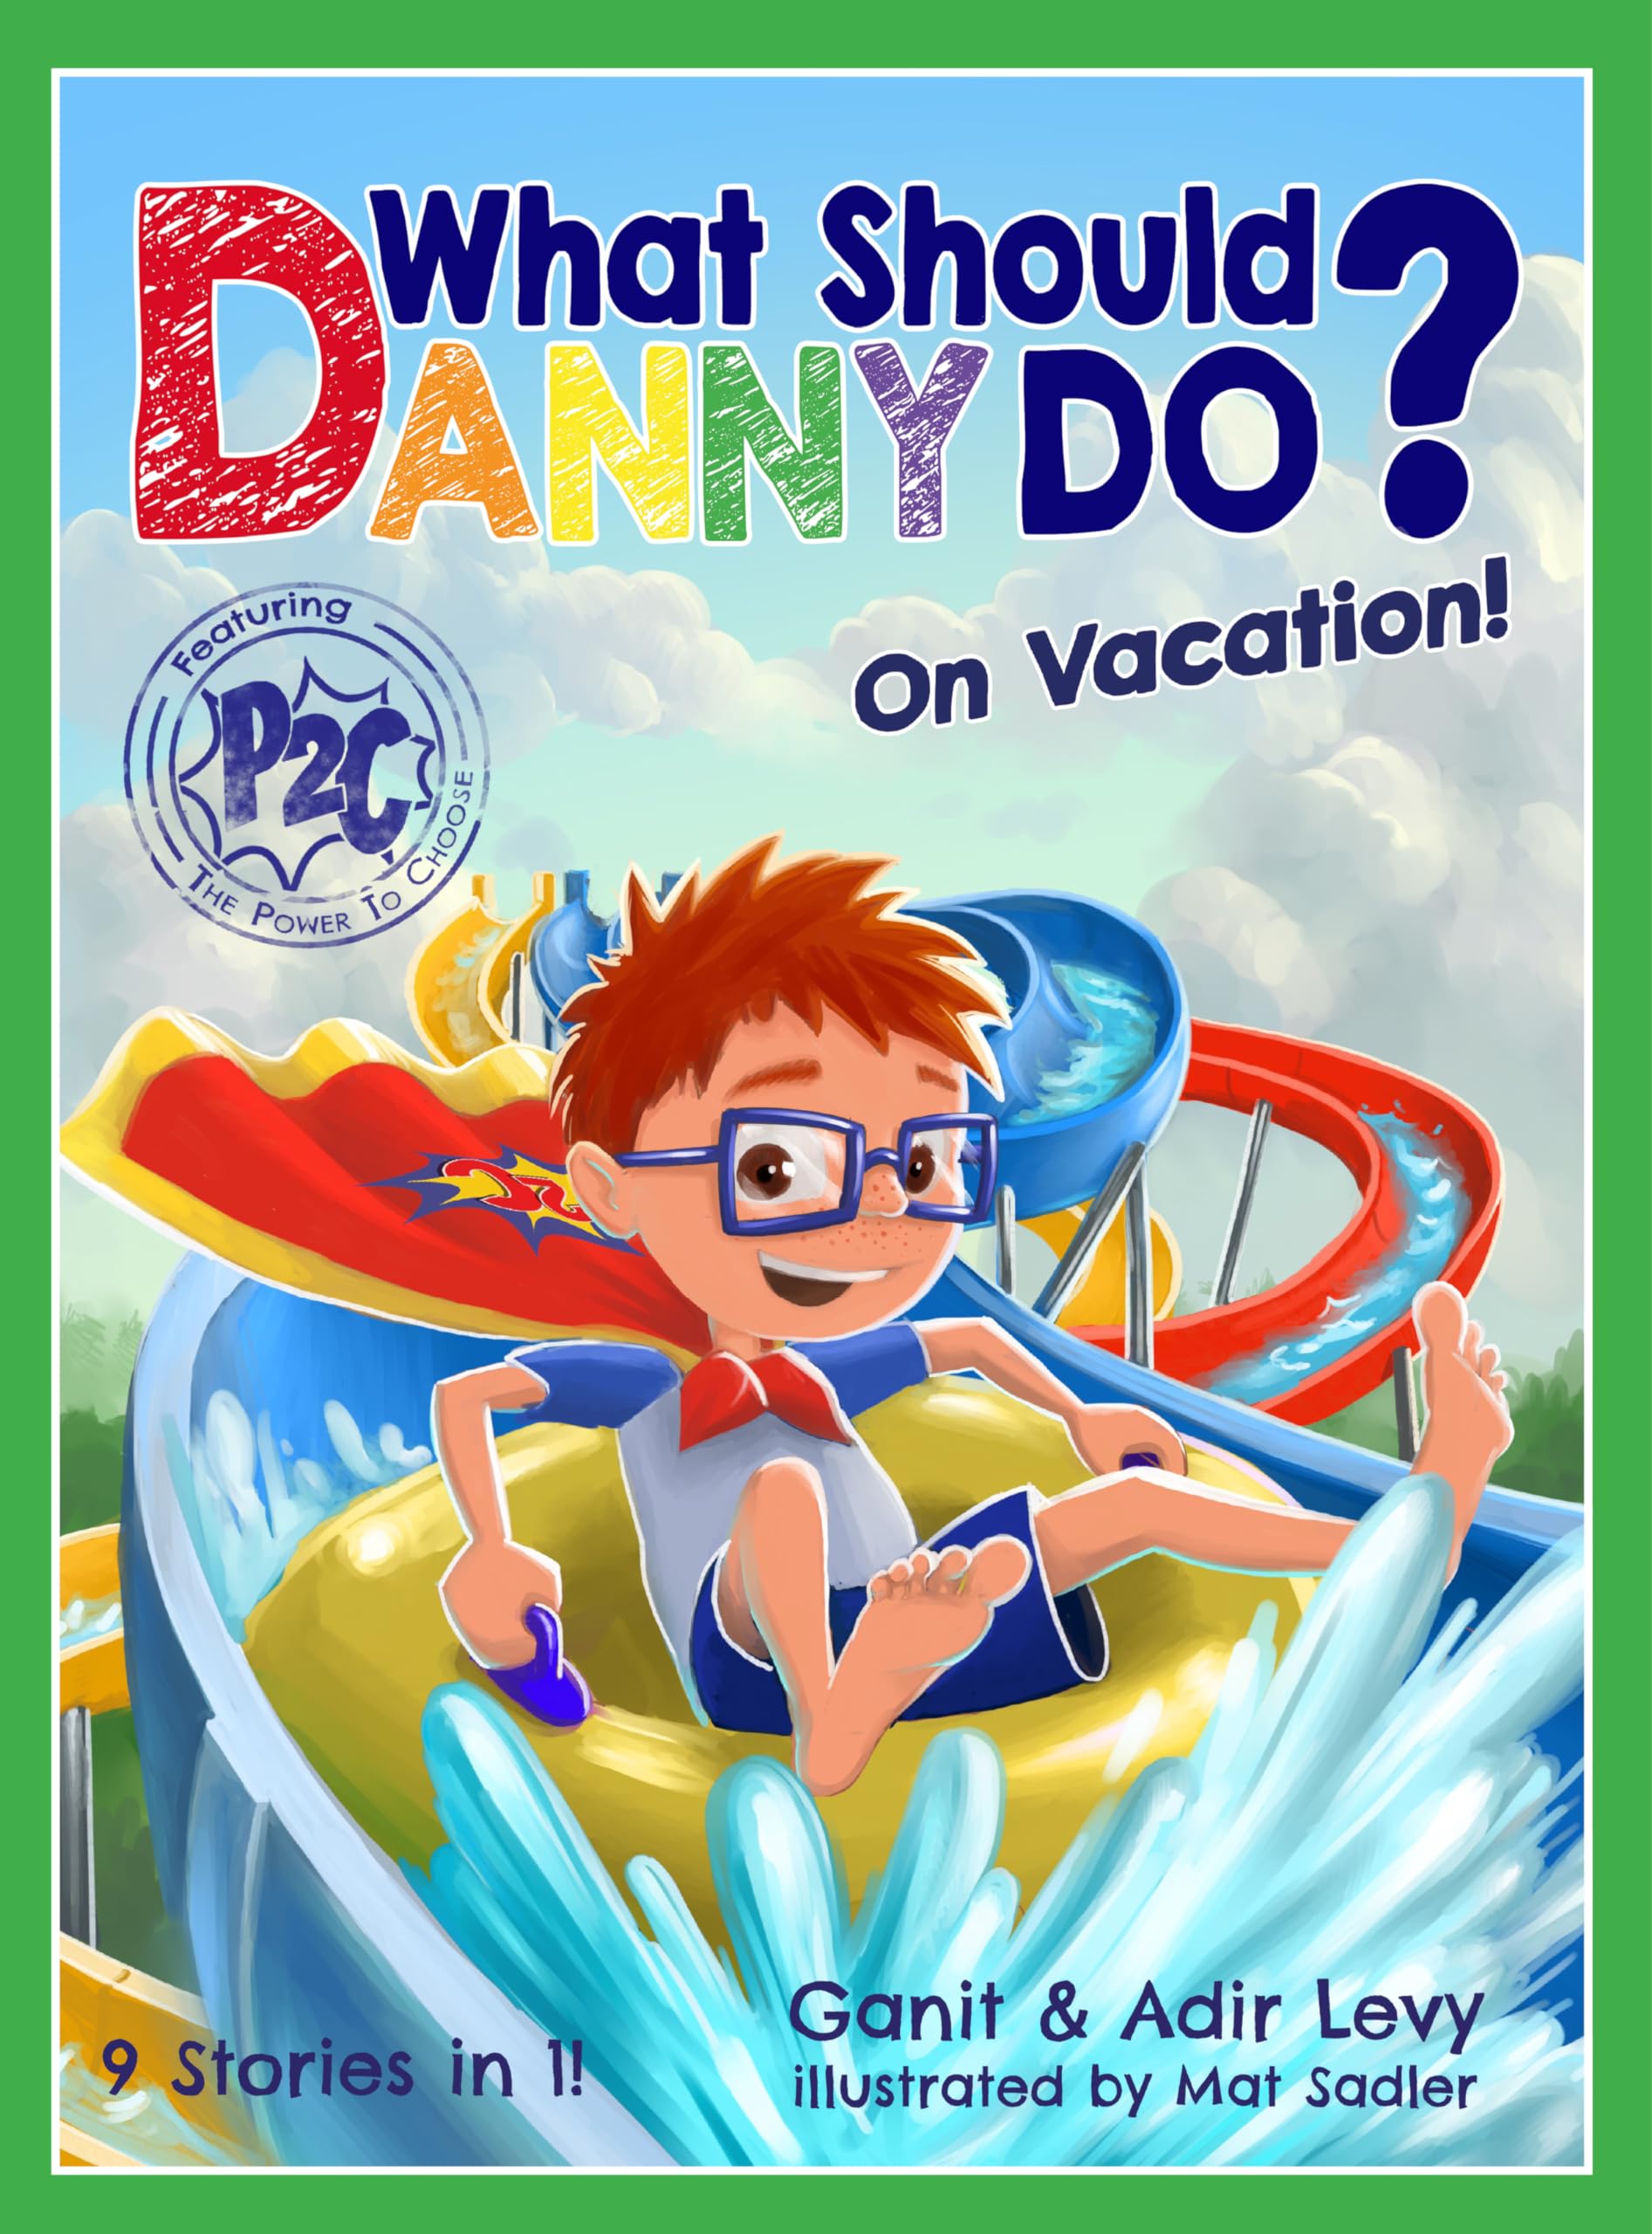 What Should Danny Do? on Vacation by Levy, Adir